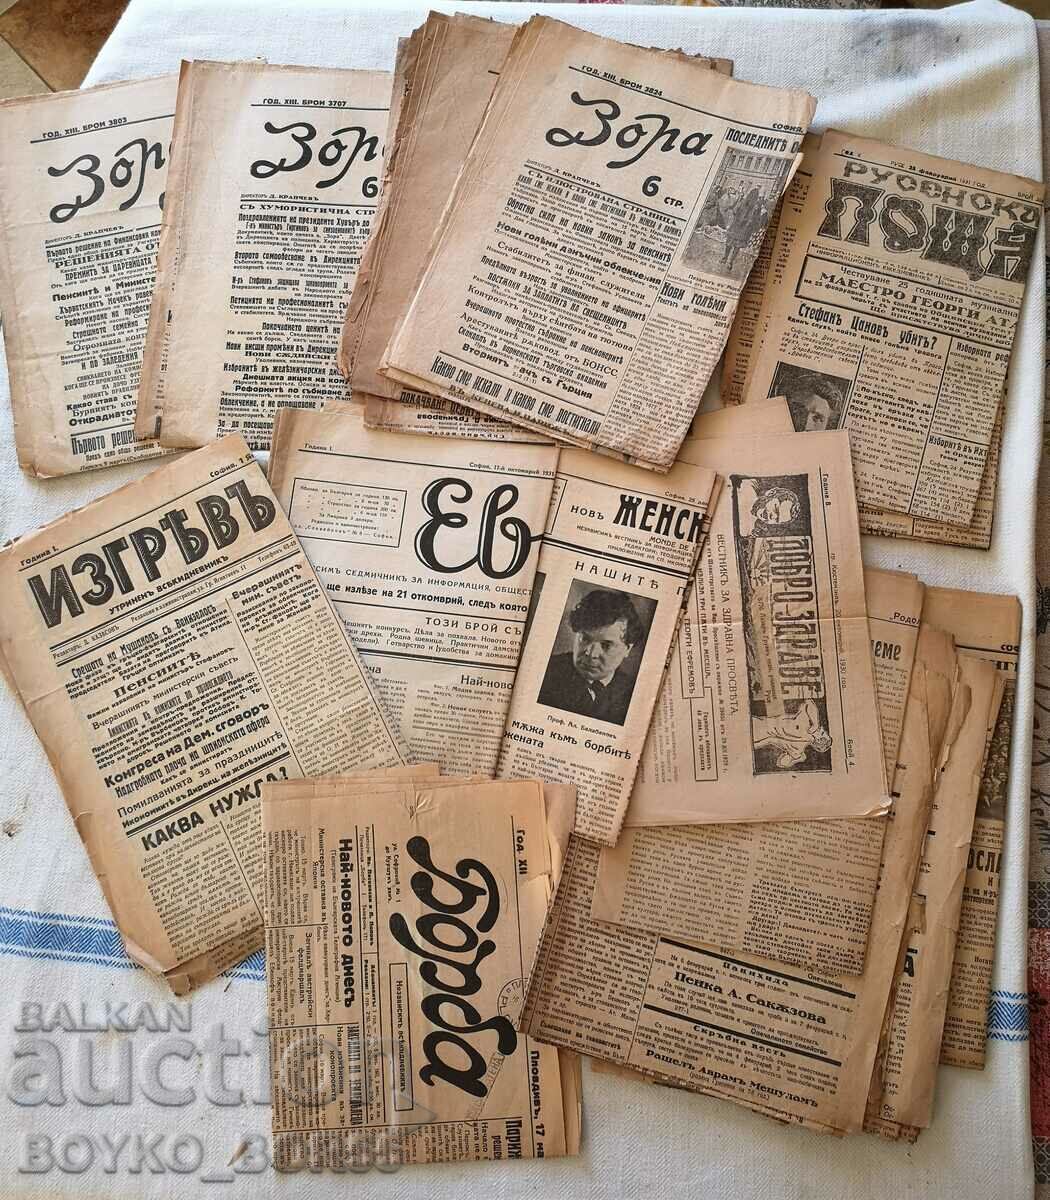 Royal Newspapers from the 1930s